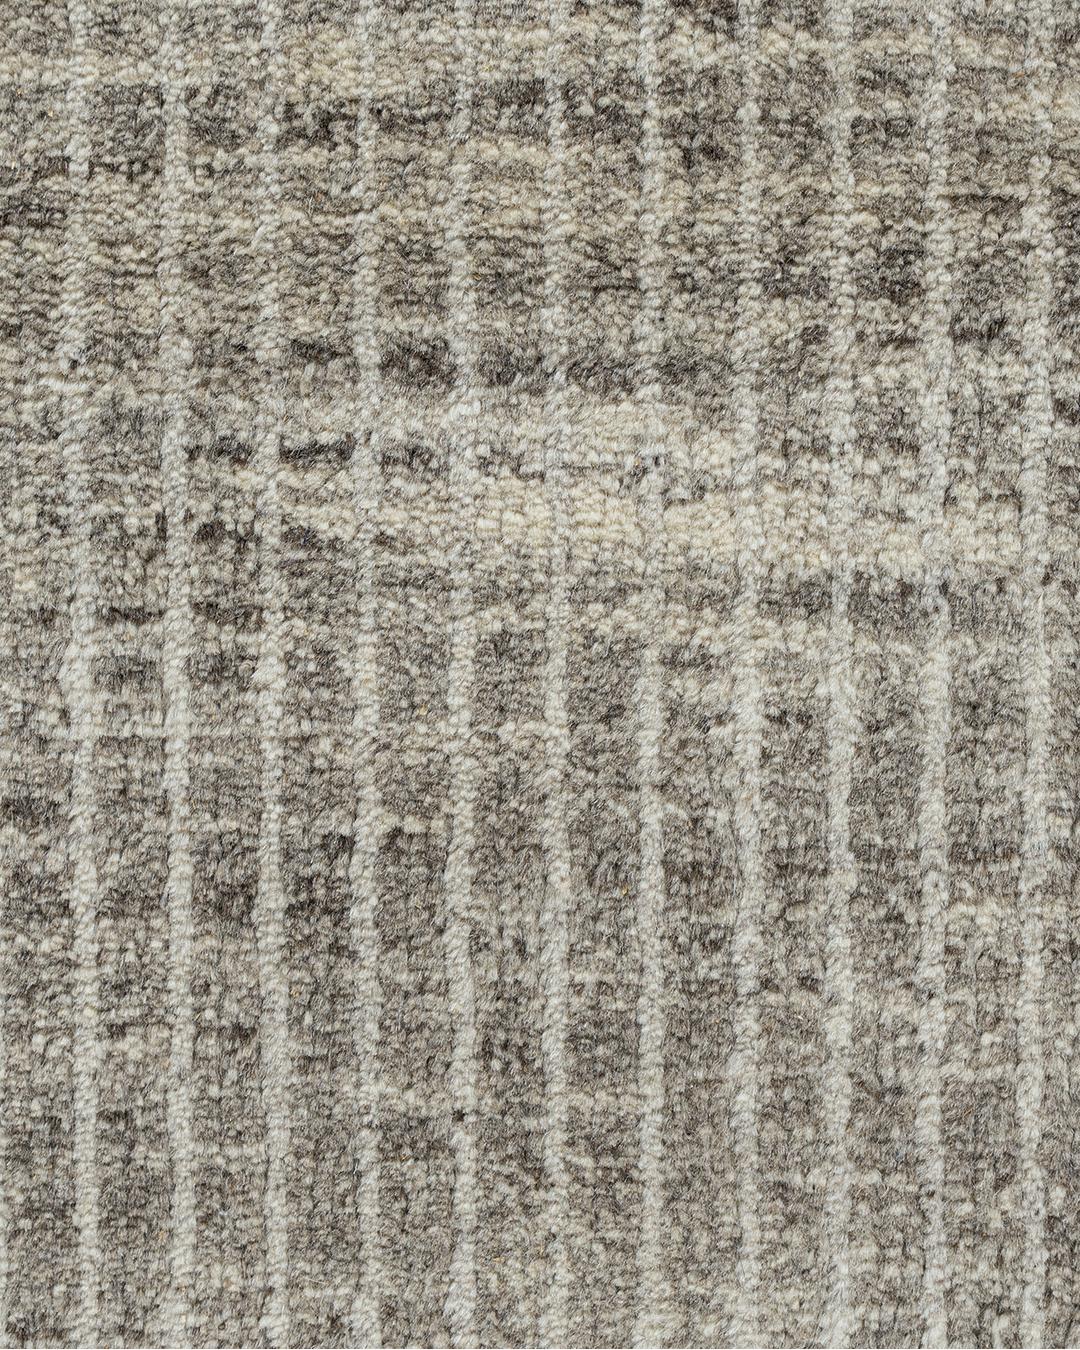 Wool Organic Night Contemporary Rug  9'10x12'10 For Sale